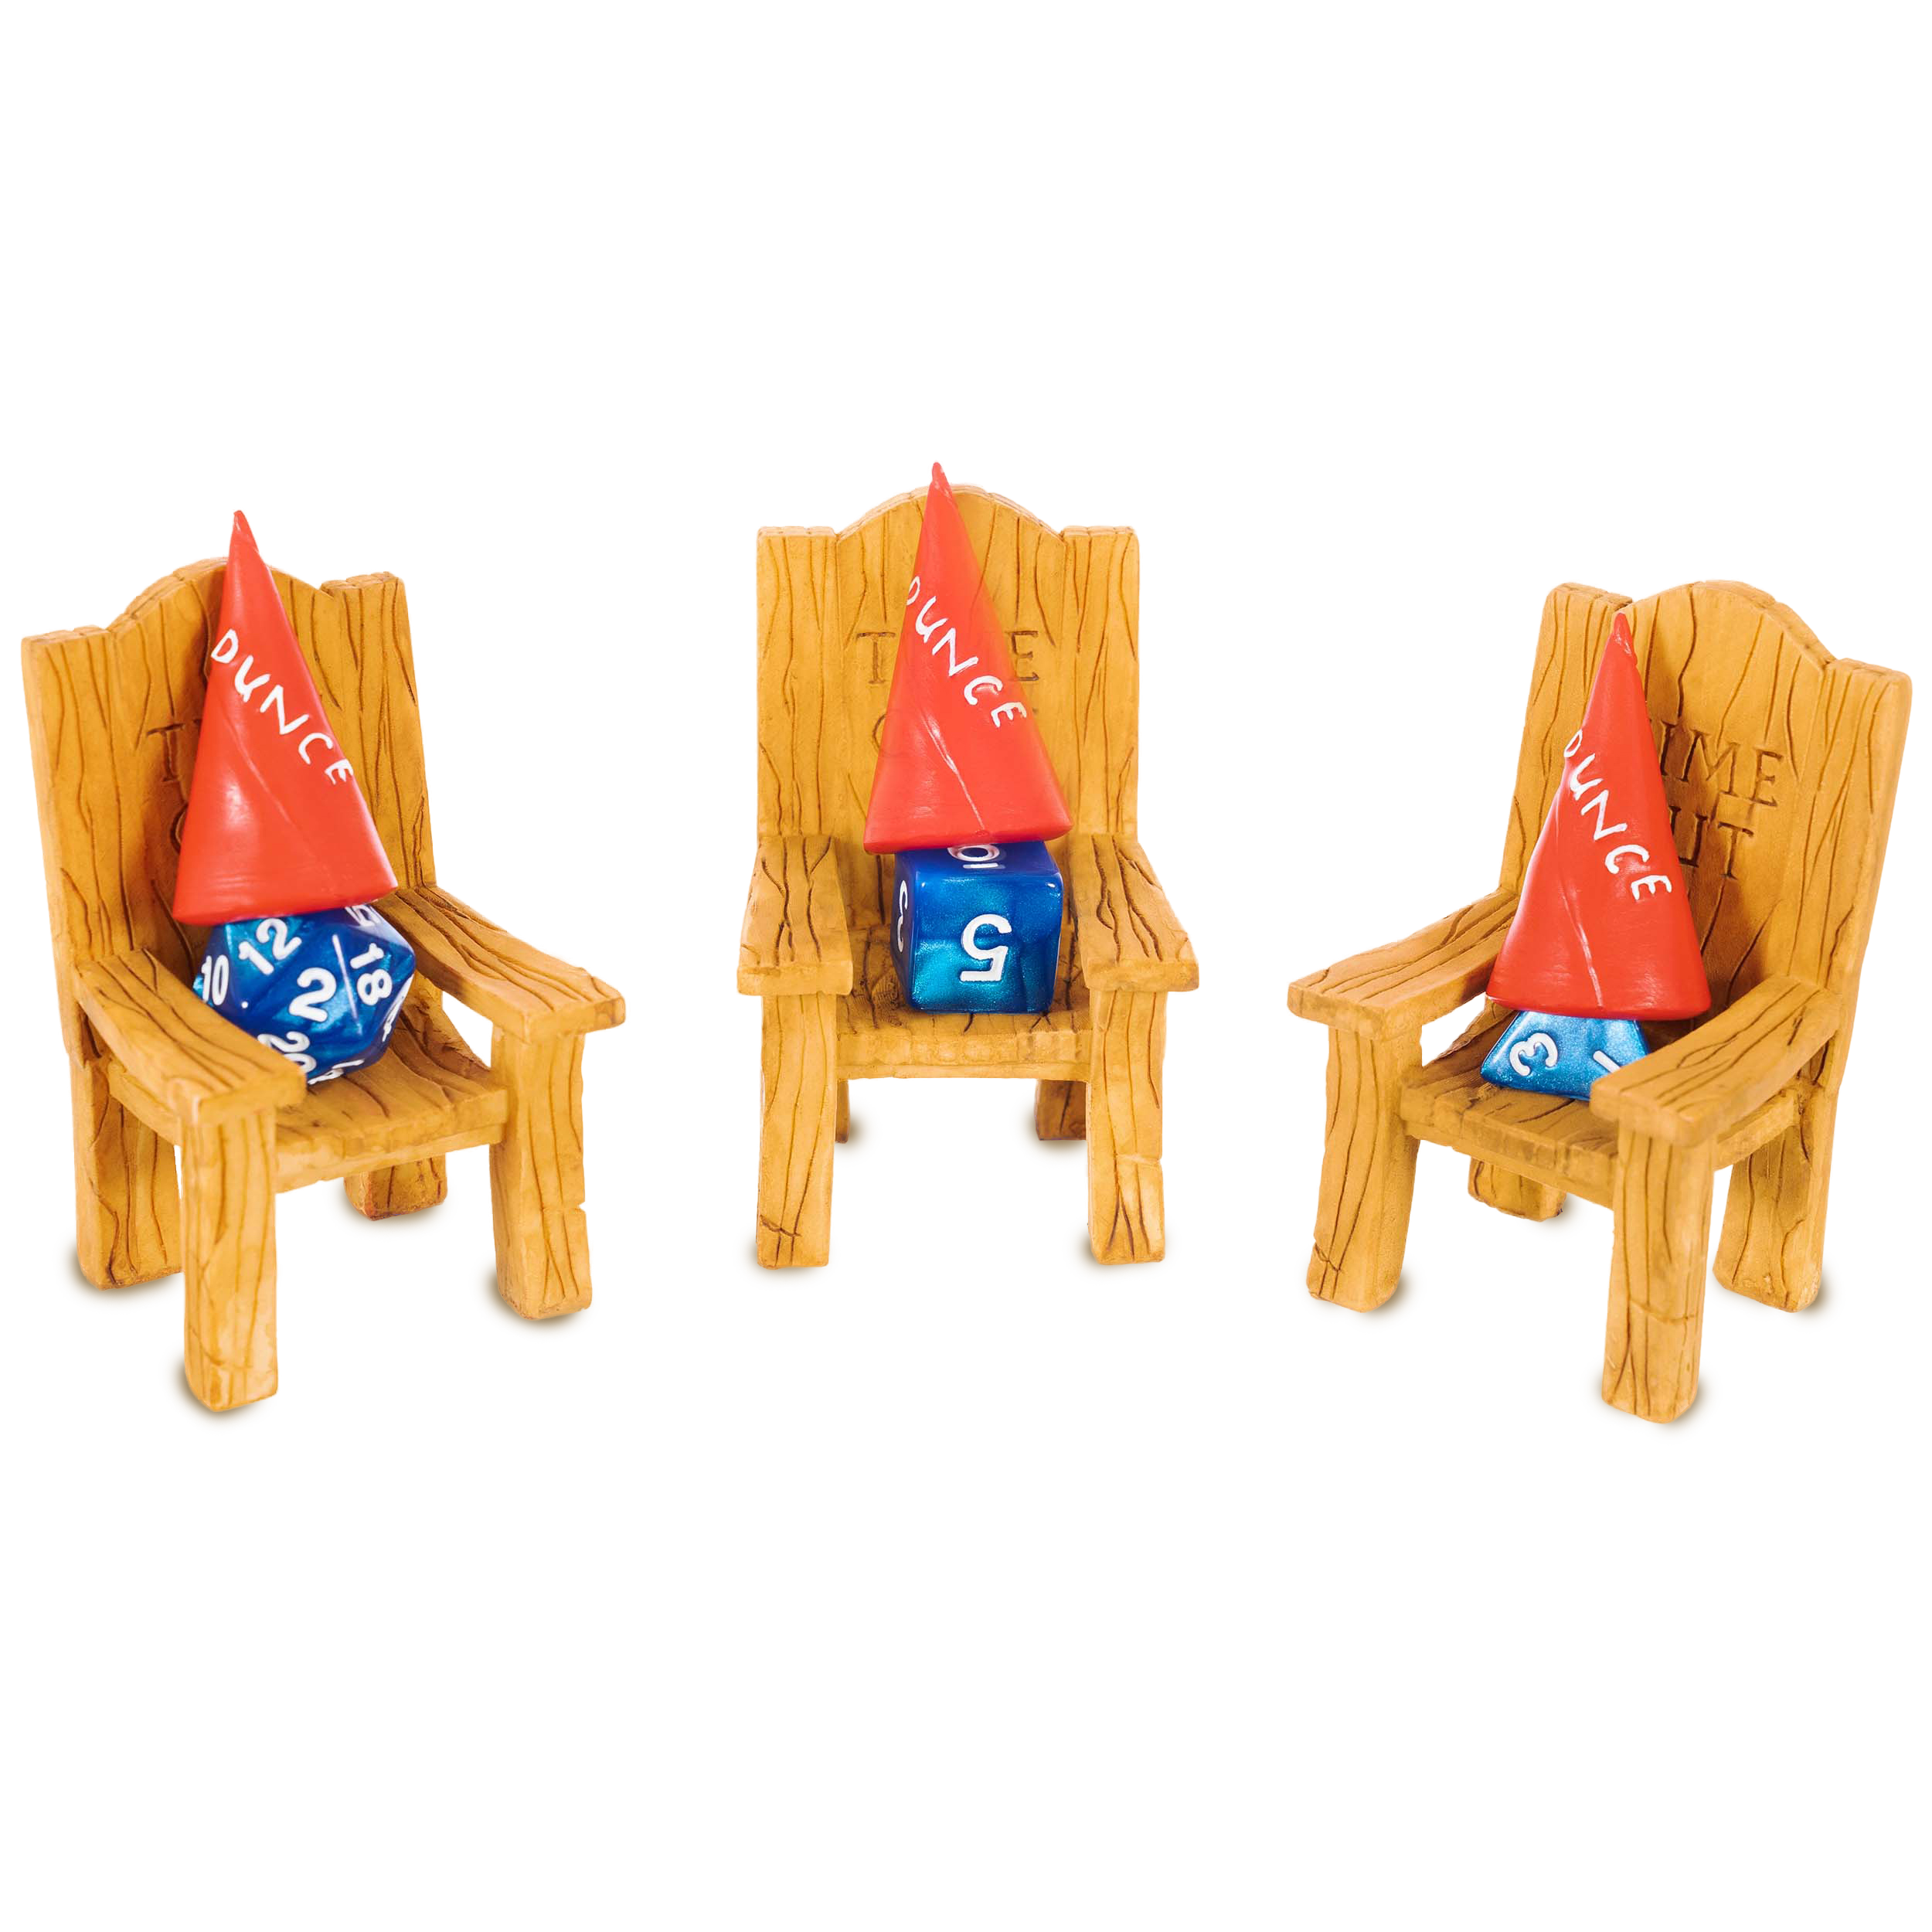 Dice Jail Chair & Dunce Hat